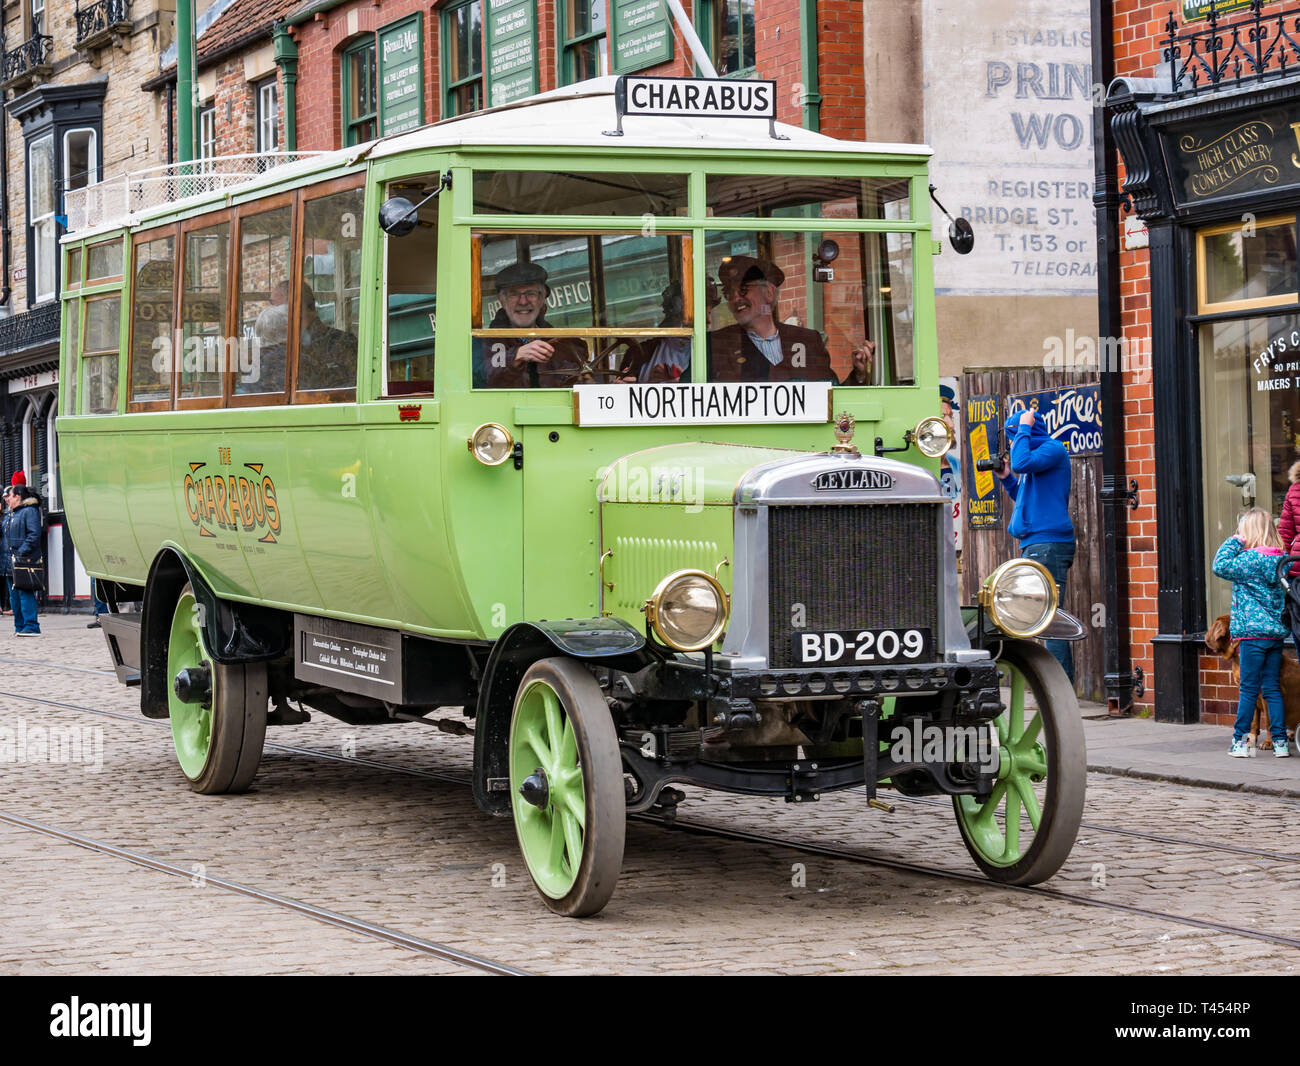 Beamish Museum, Beamish, Durham County, England, United Kingdom, 13 April 2019. Beamish Steam Day: People dressed in vintage costumes driving a vintage 1921 Leyland charabus on display at Beamish Living Museum Stock Photo